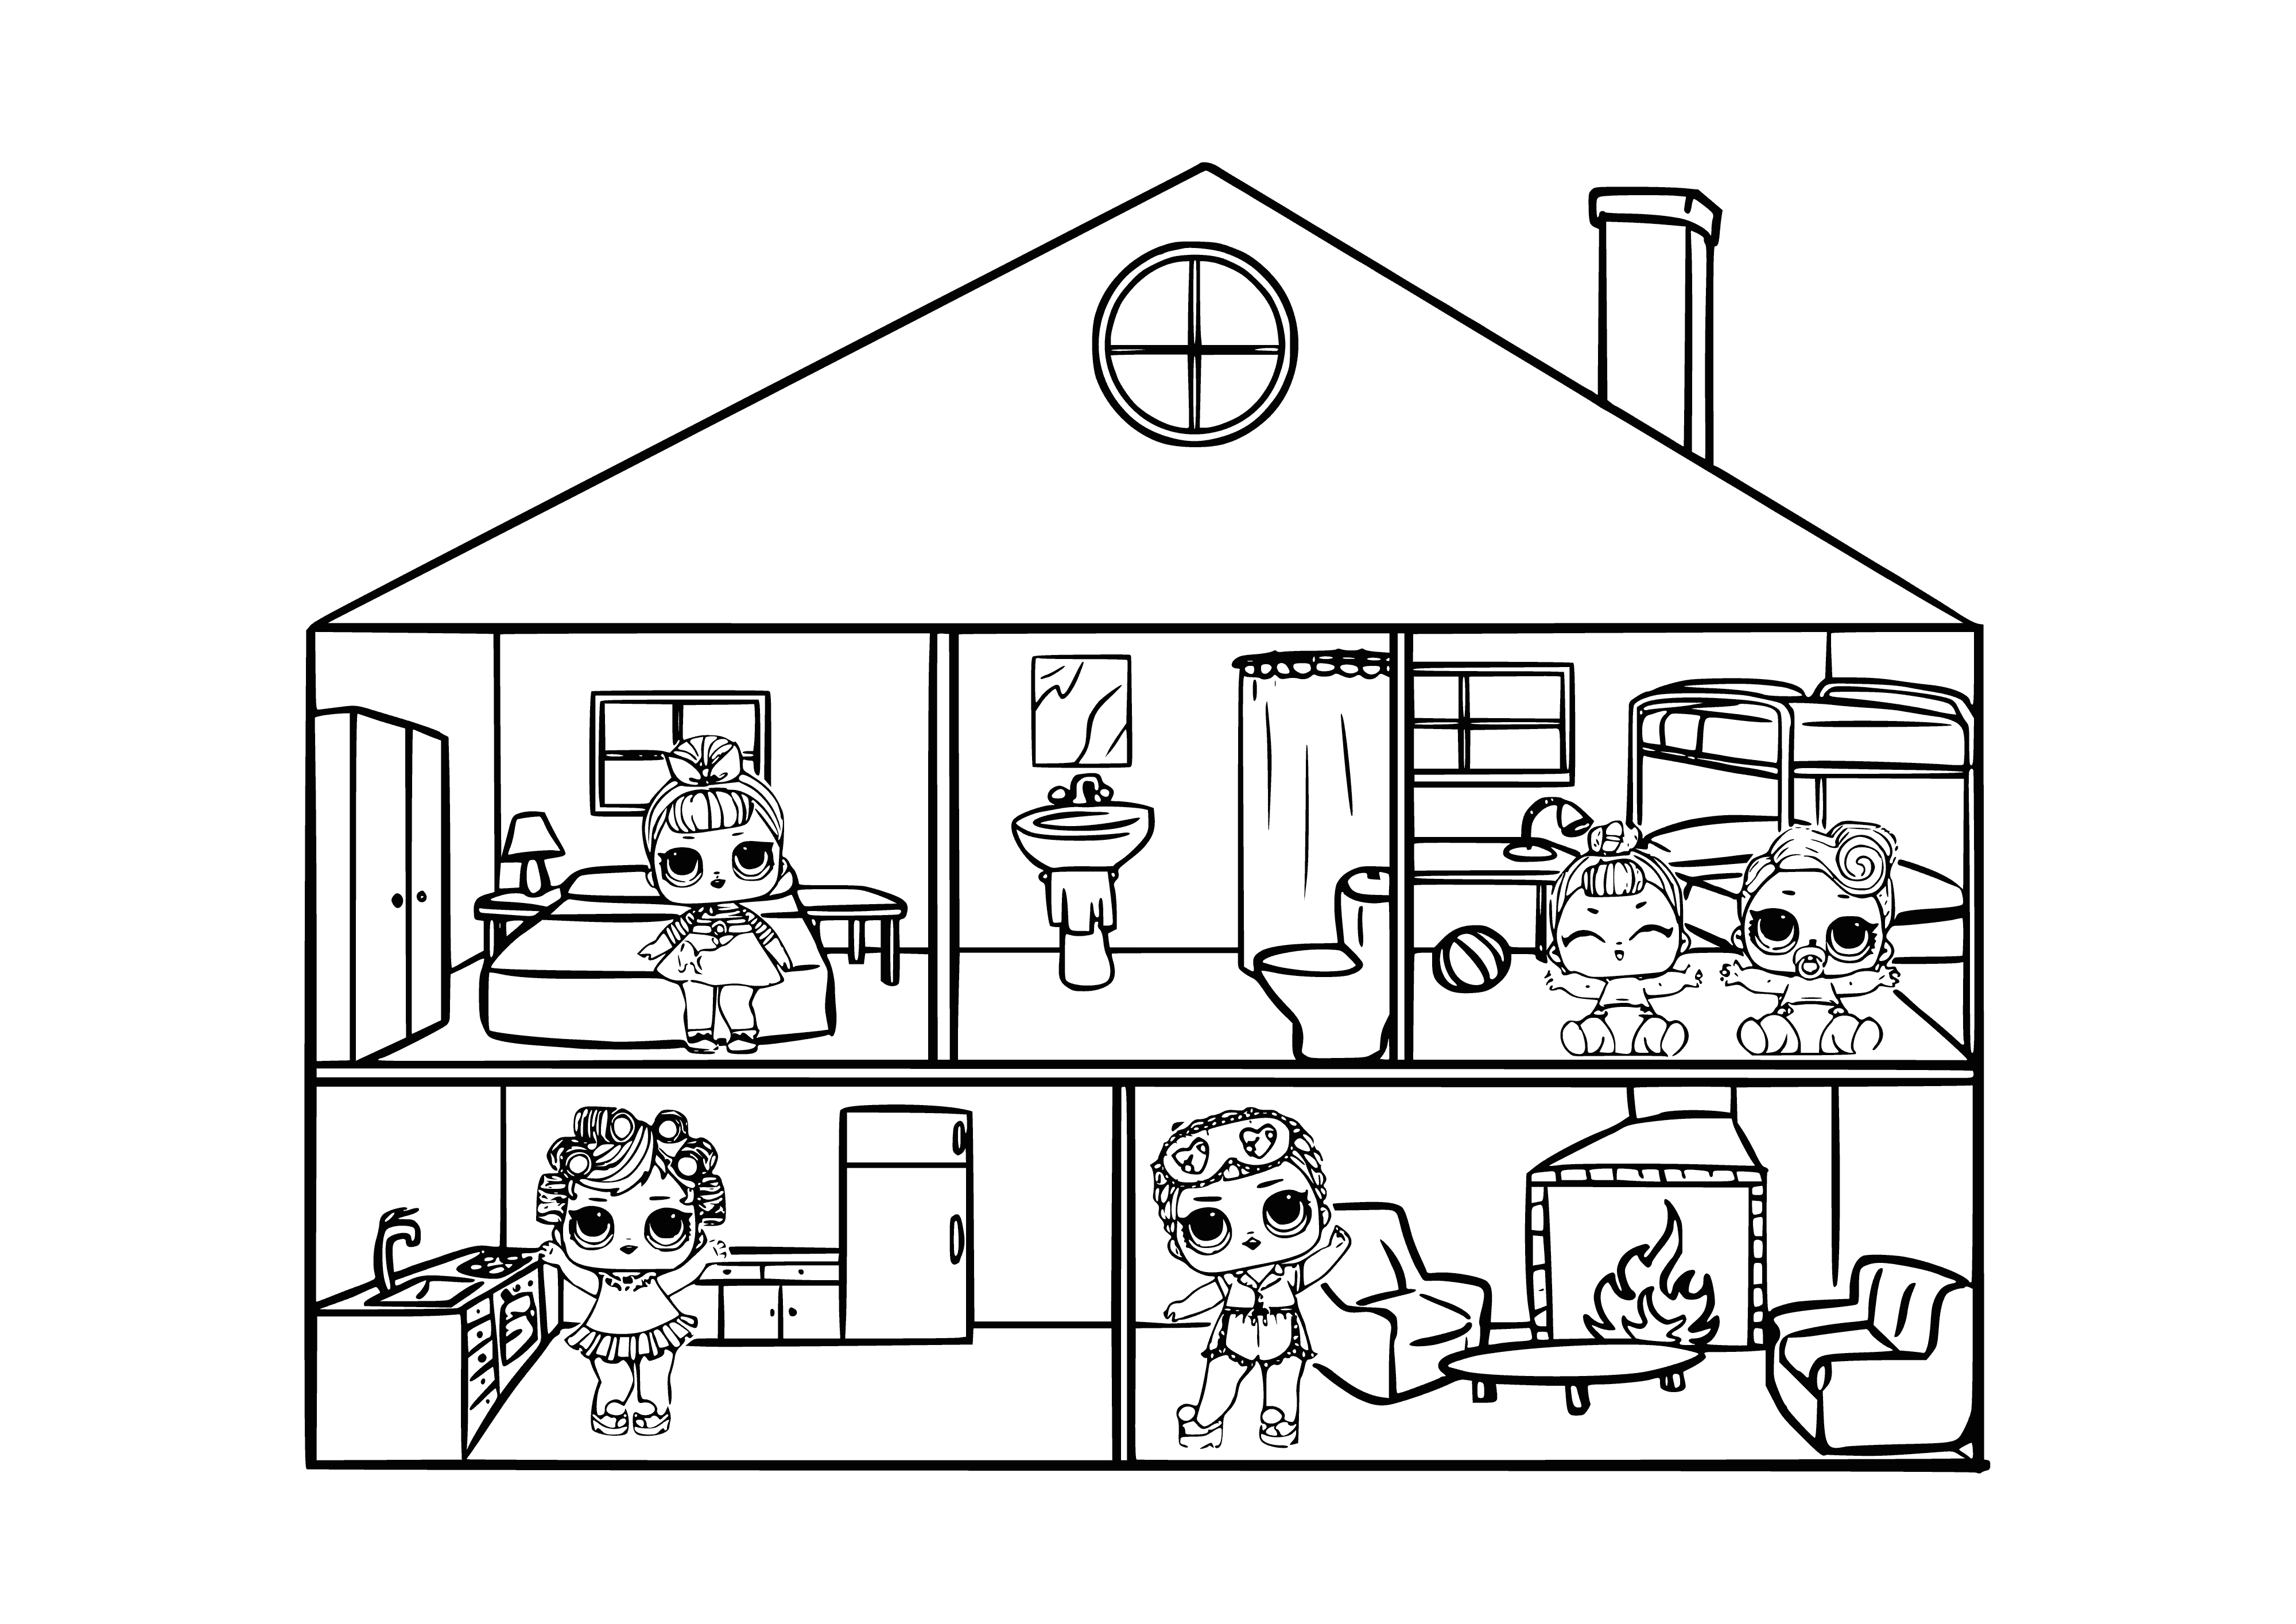 coloring page: A pink toy house has a living room, kitchen, two bedrooms, & balcony for dolls to explore.